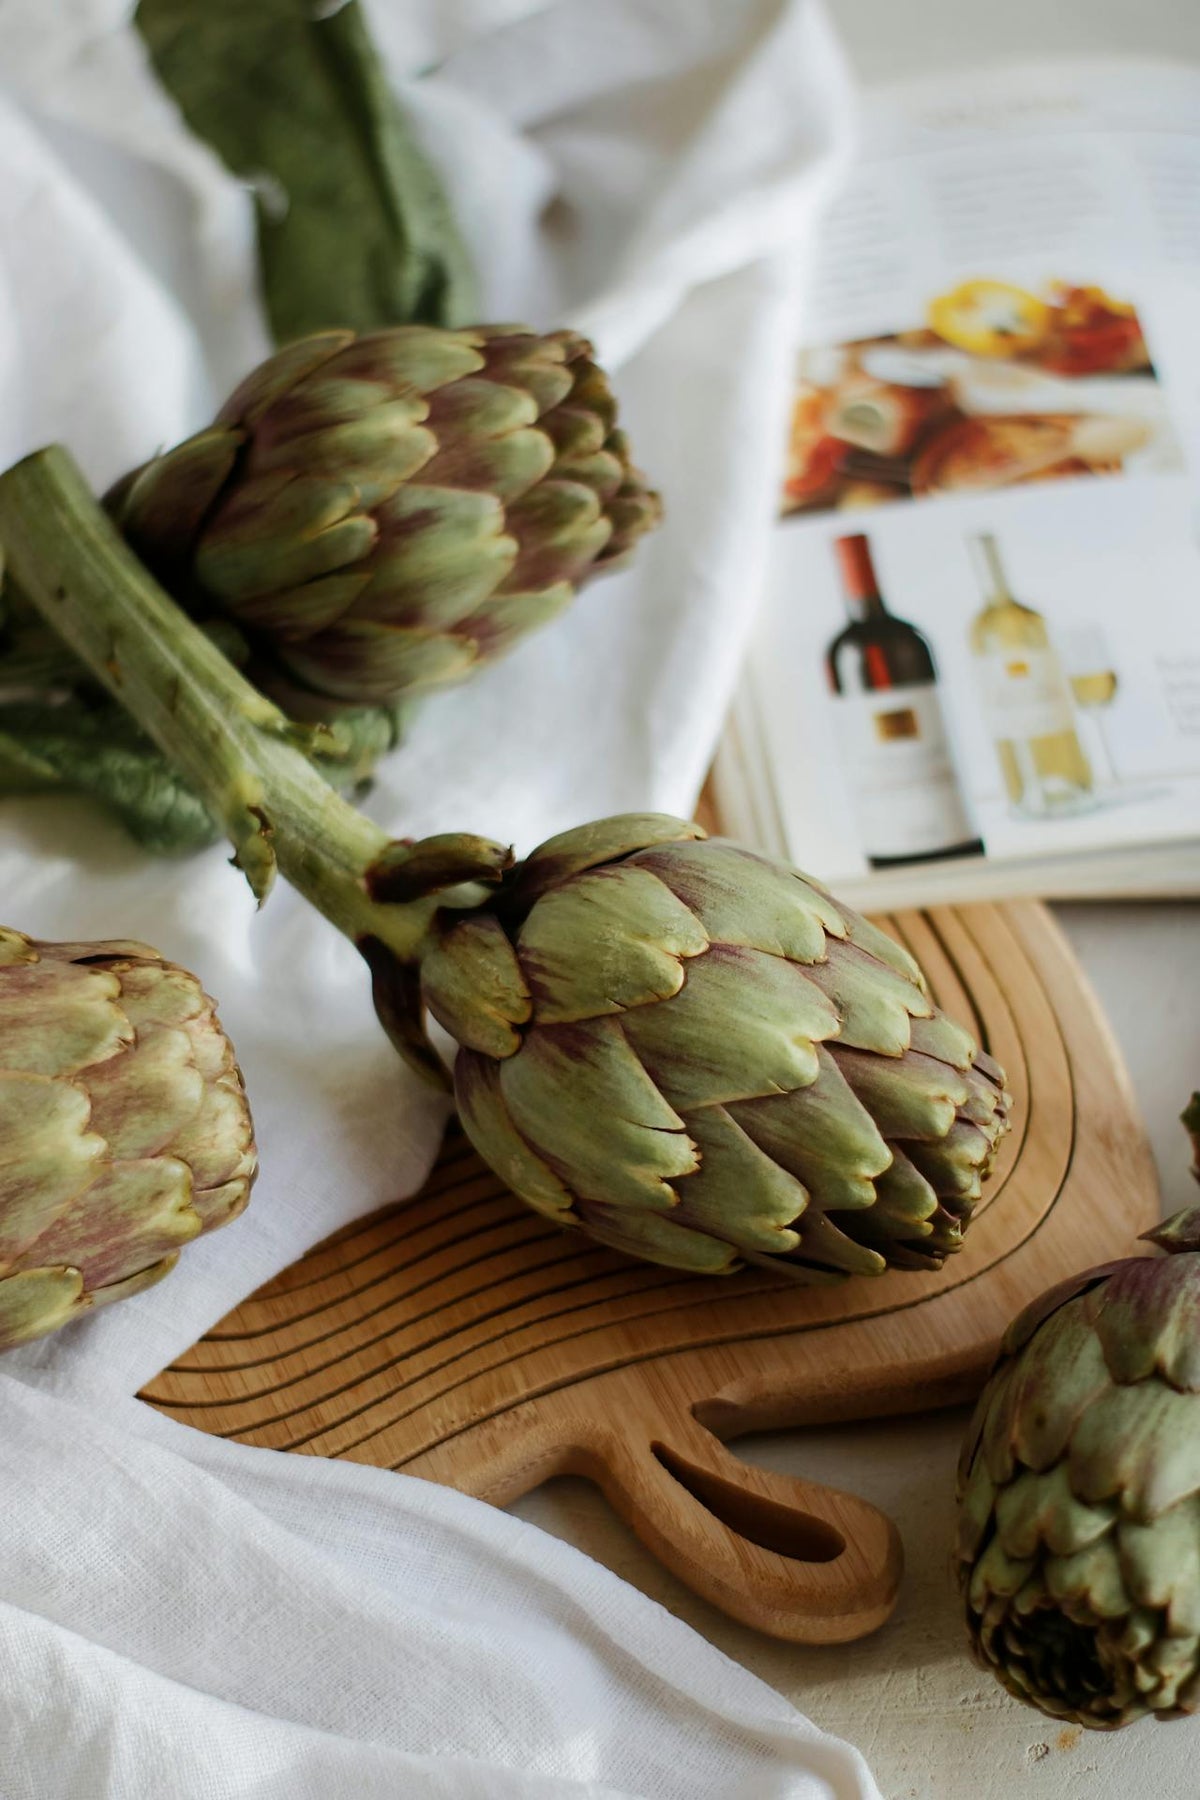 Artichoke Extract for Liver Health: Benefits and Where To Buy